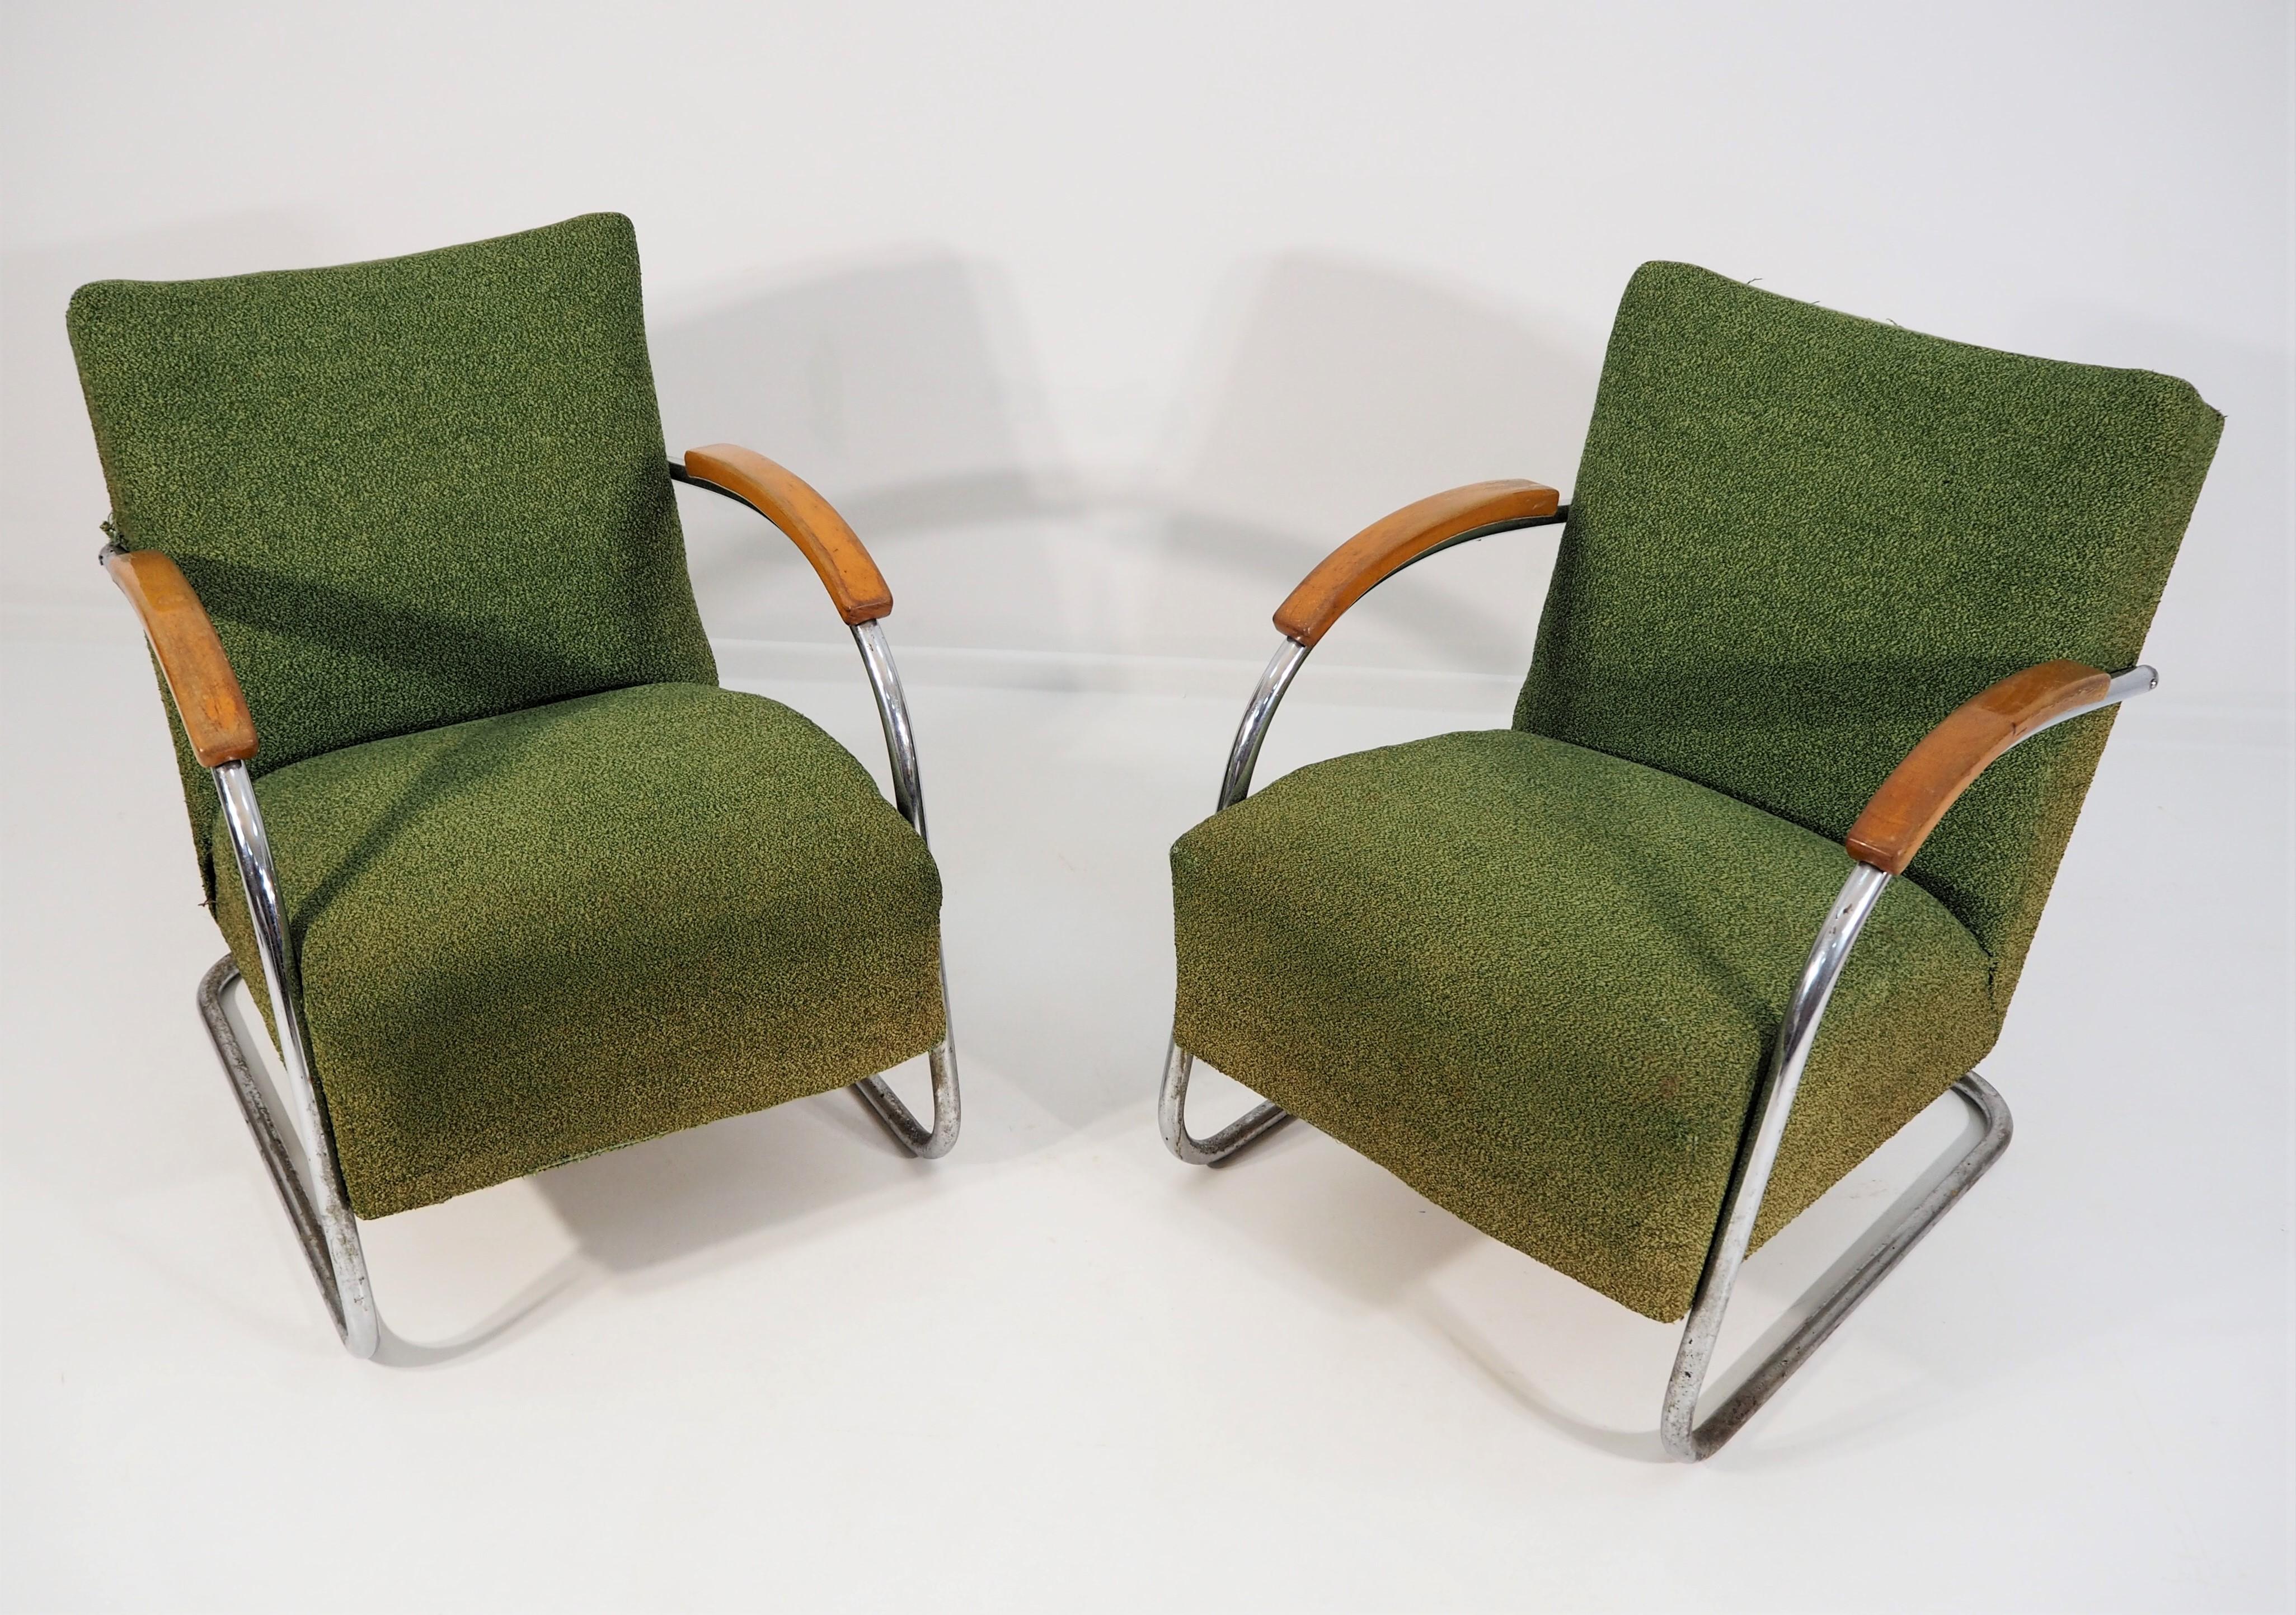 Classic Czech chrome chairs from Mücke Melder, 1940s, set of 2. Original condition. Dimensions: Height 75 cm, width 58 cm, depth 80 cm.